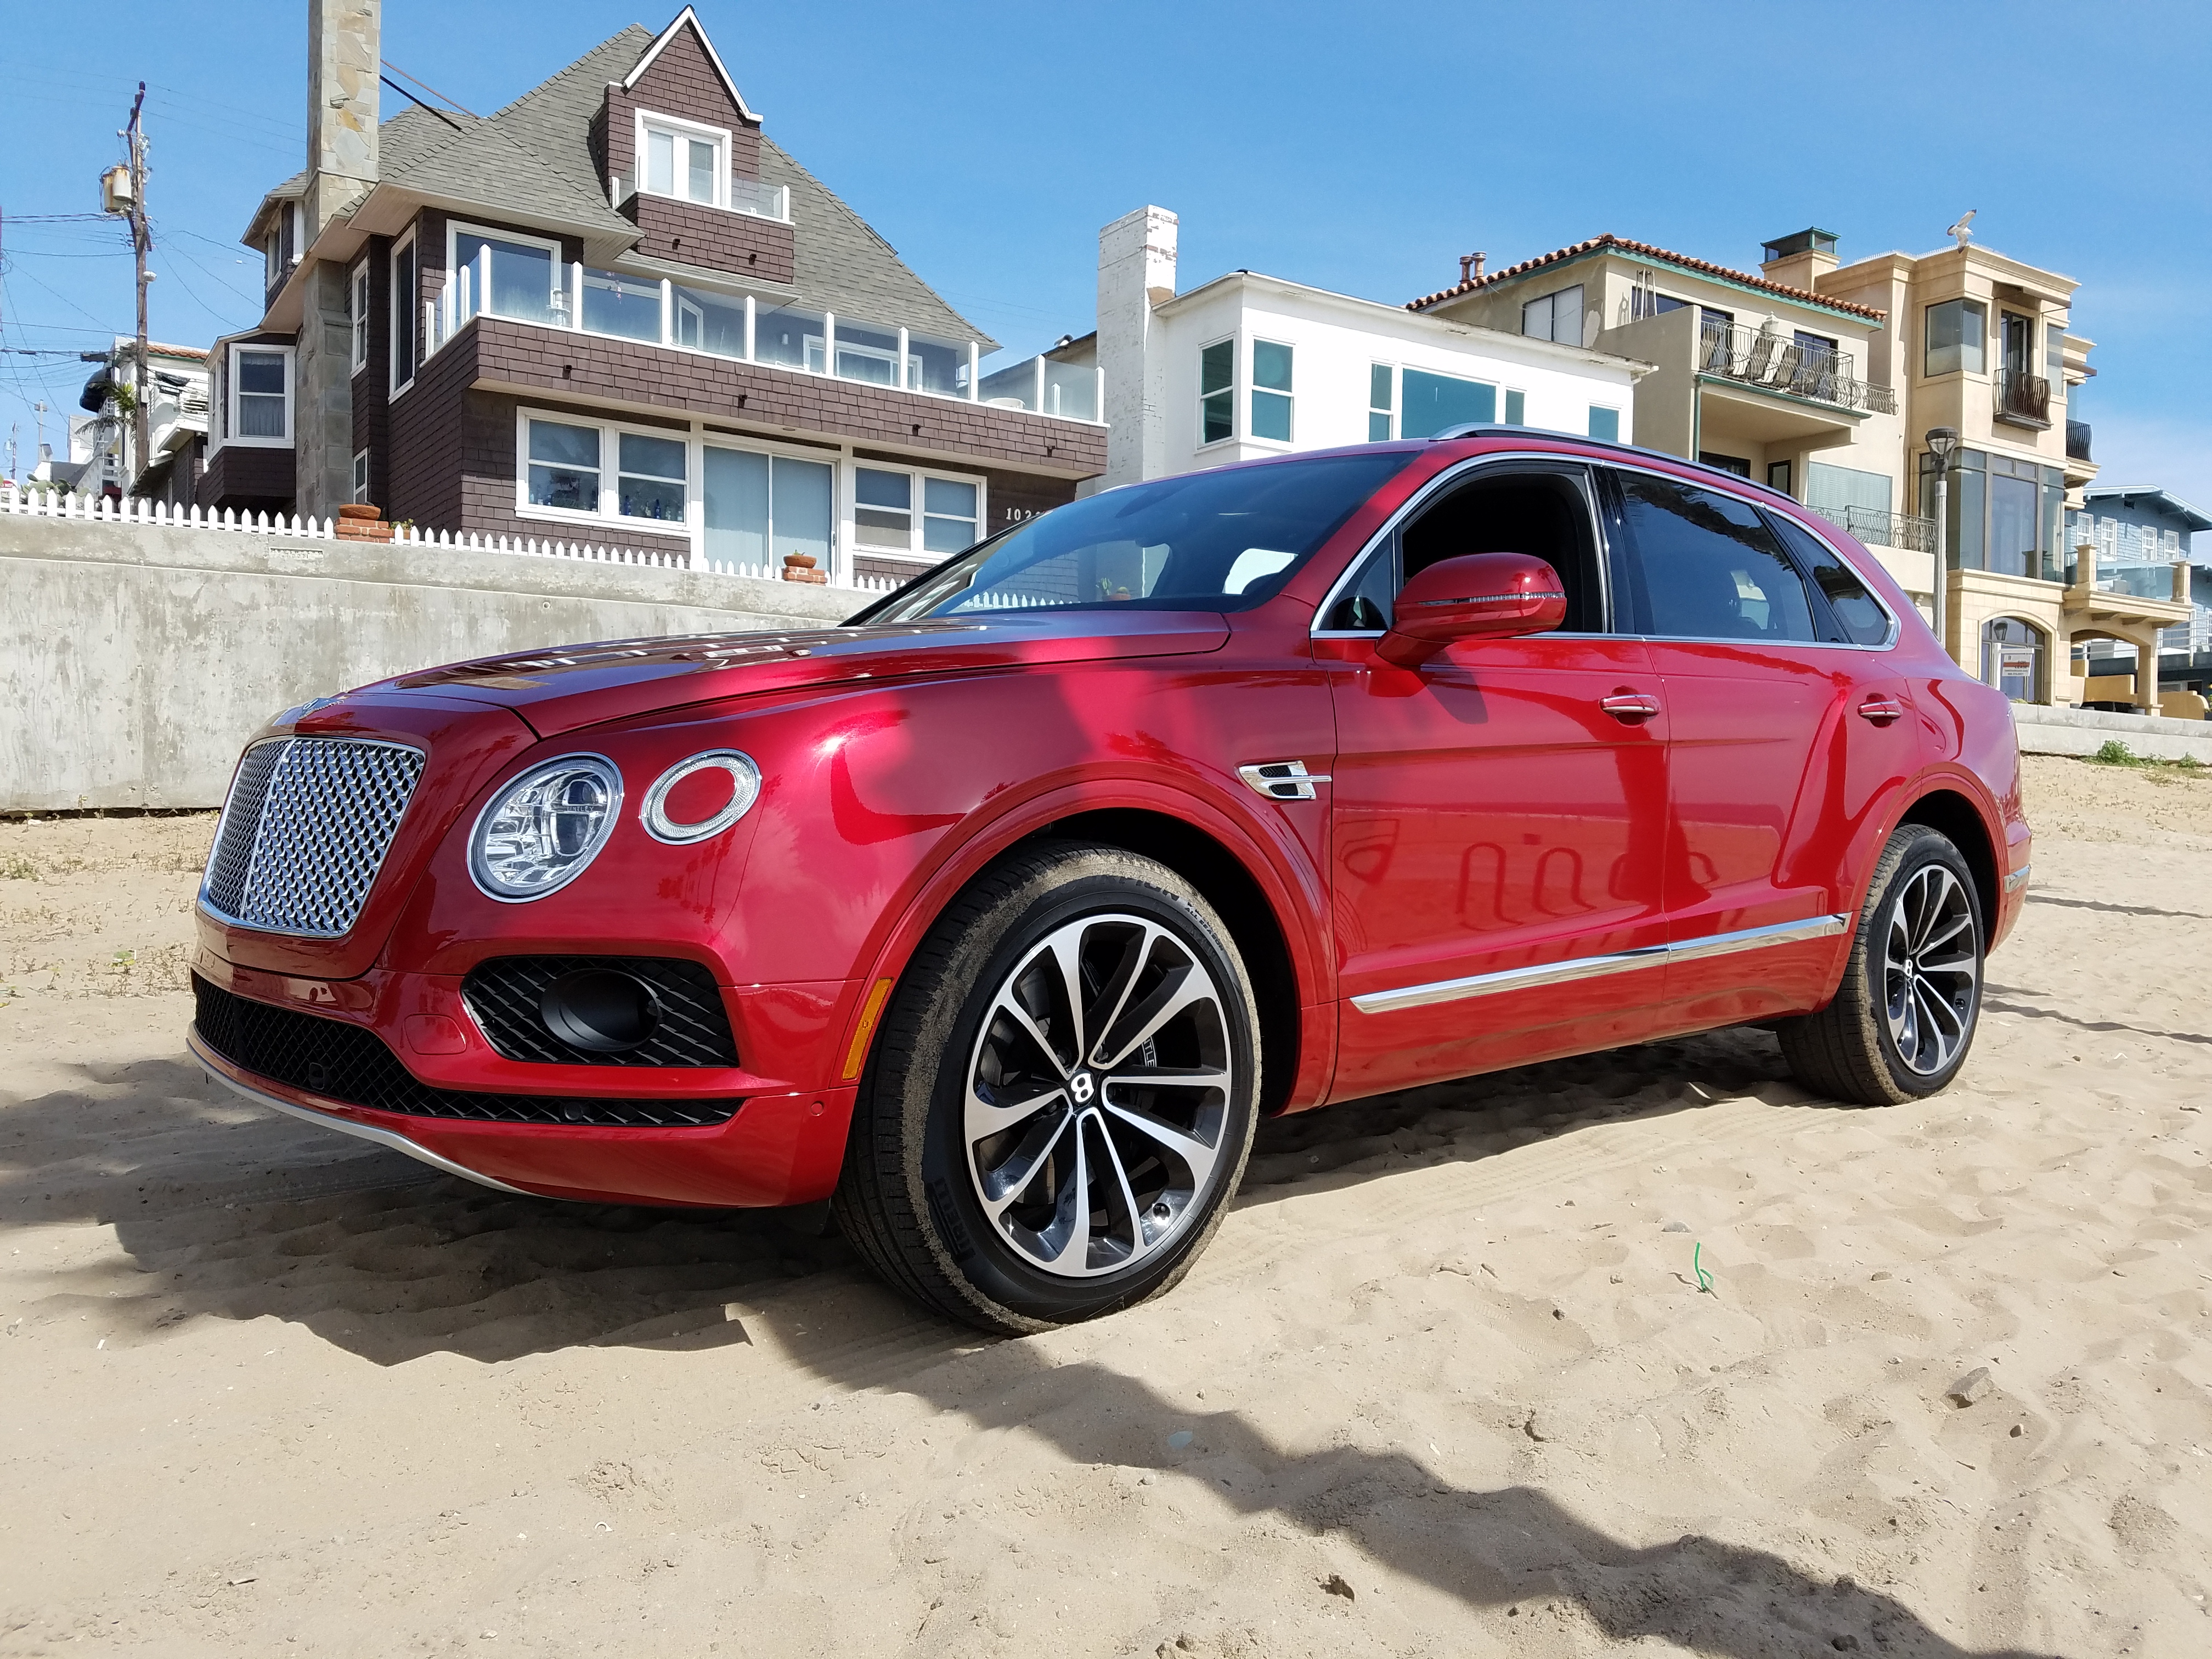 We Have the Bentley Bentayga for a Week: What Would You Like to Know?